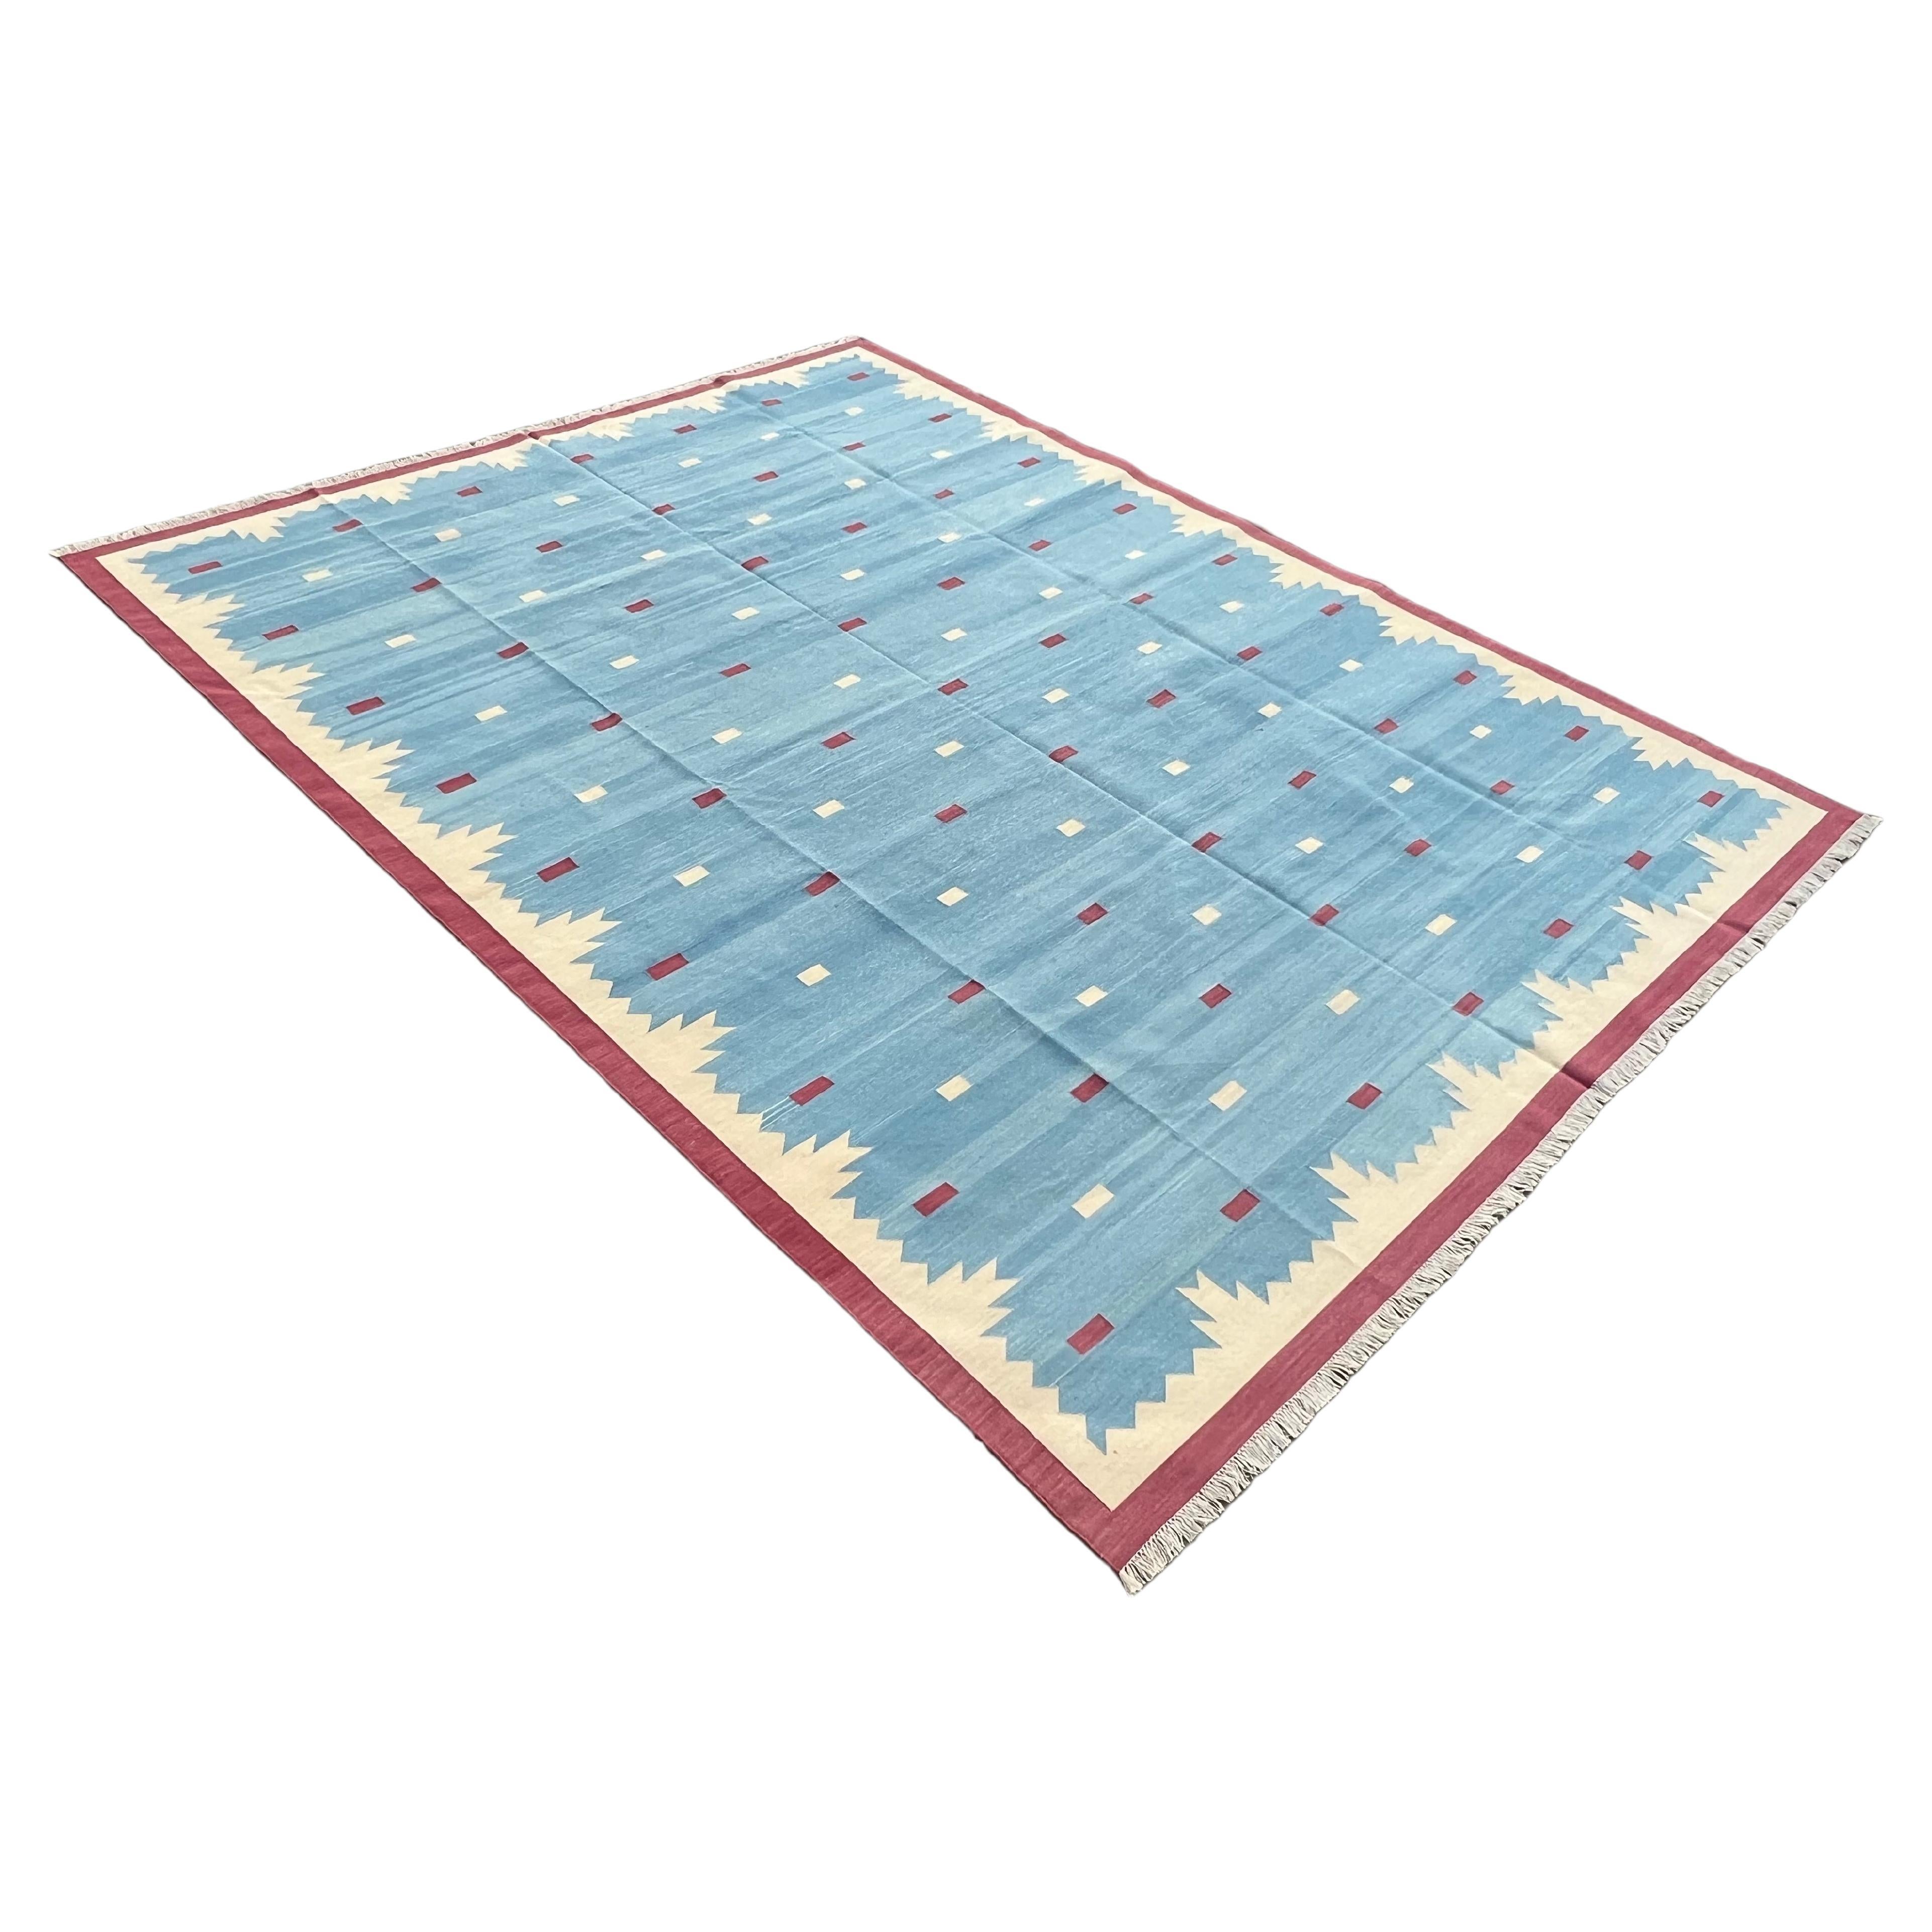 Handmade Cotton Area Flat Weave Rug, Blue And Pink Geometric Indian Dhurrie Rug